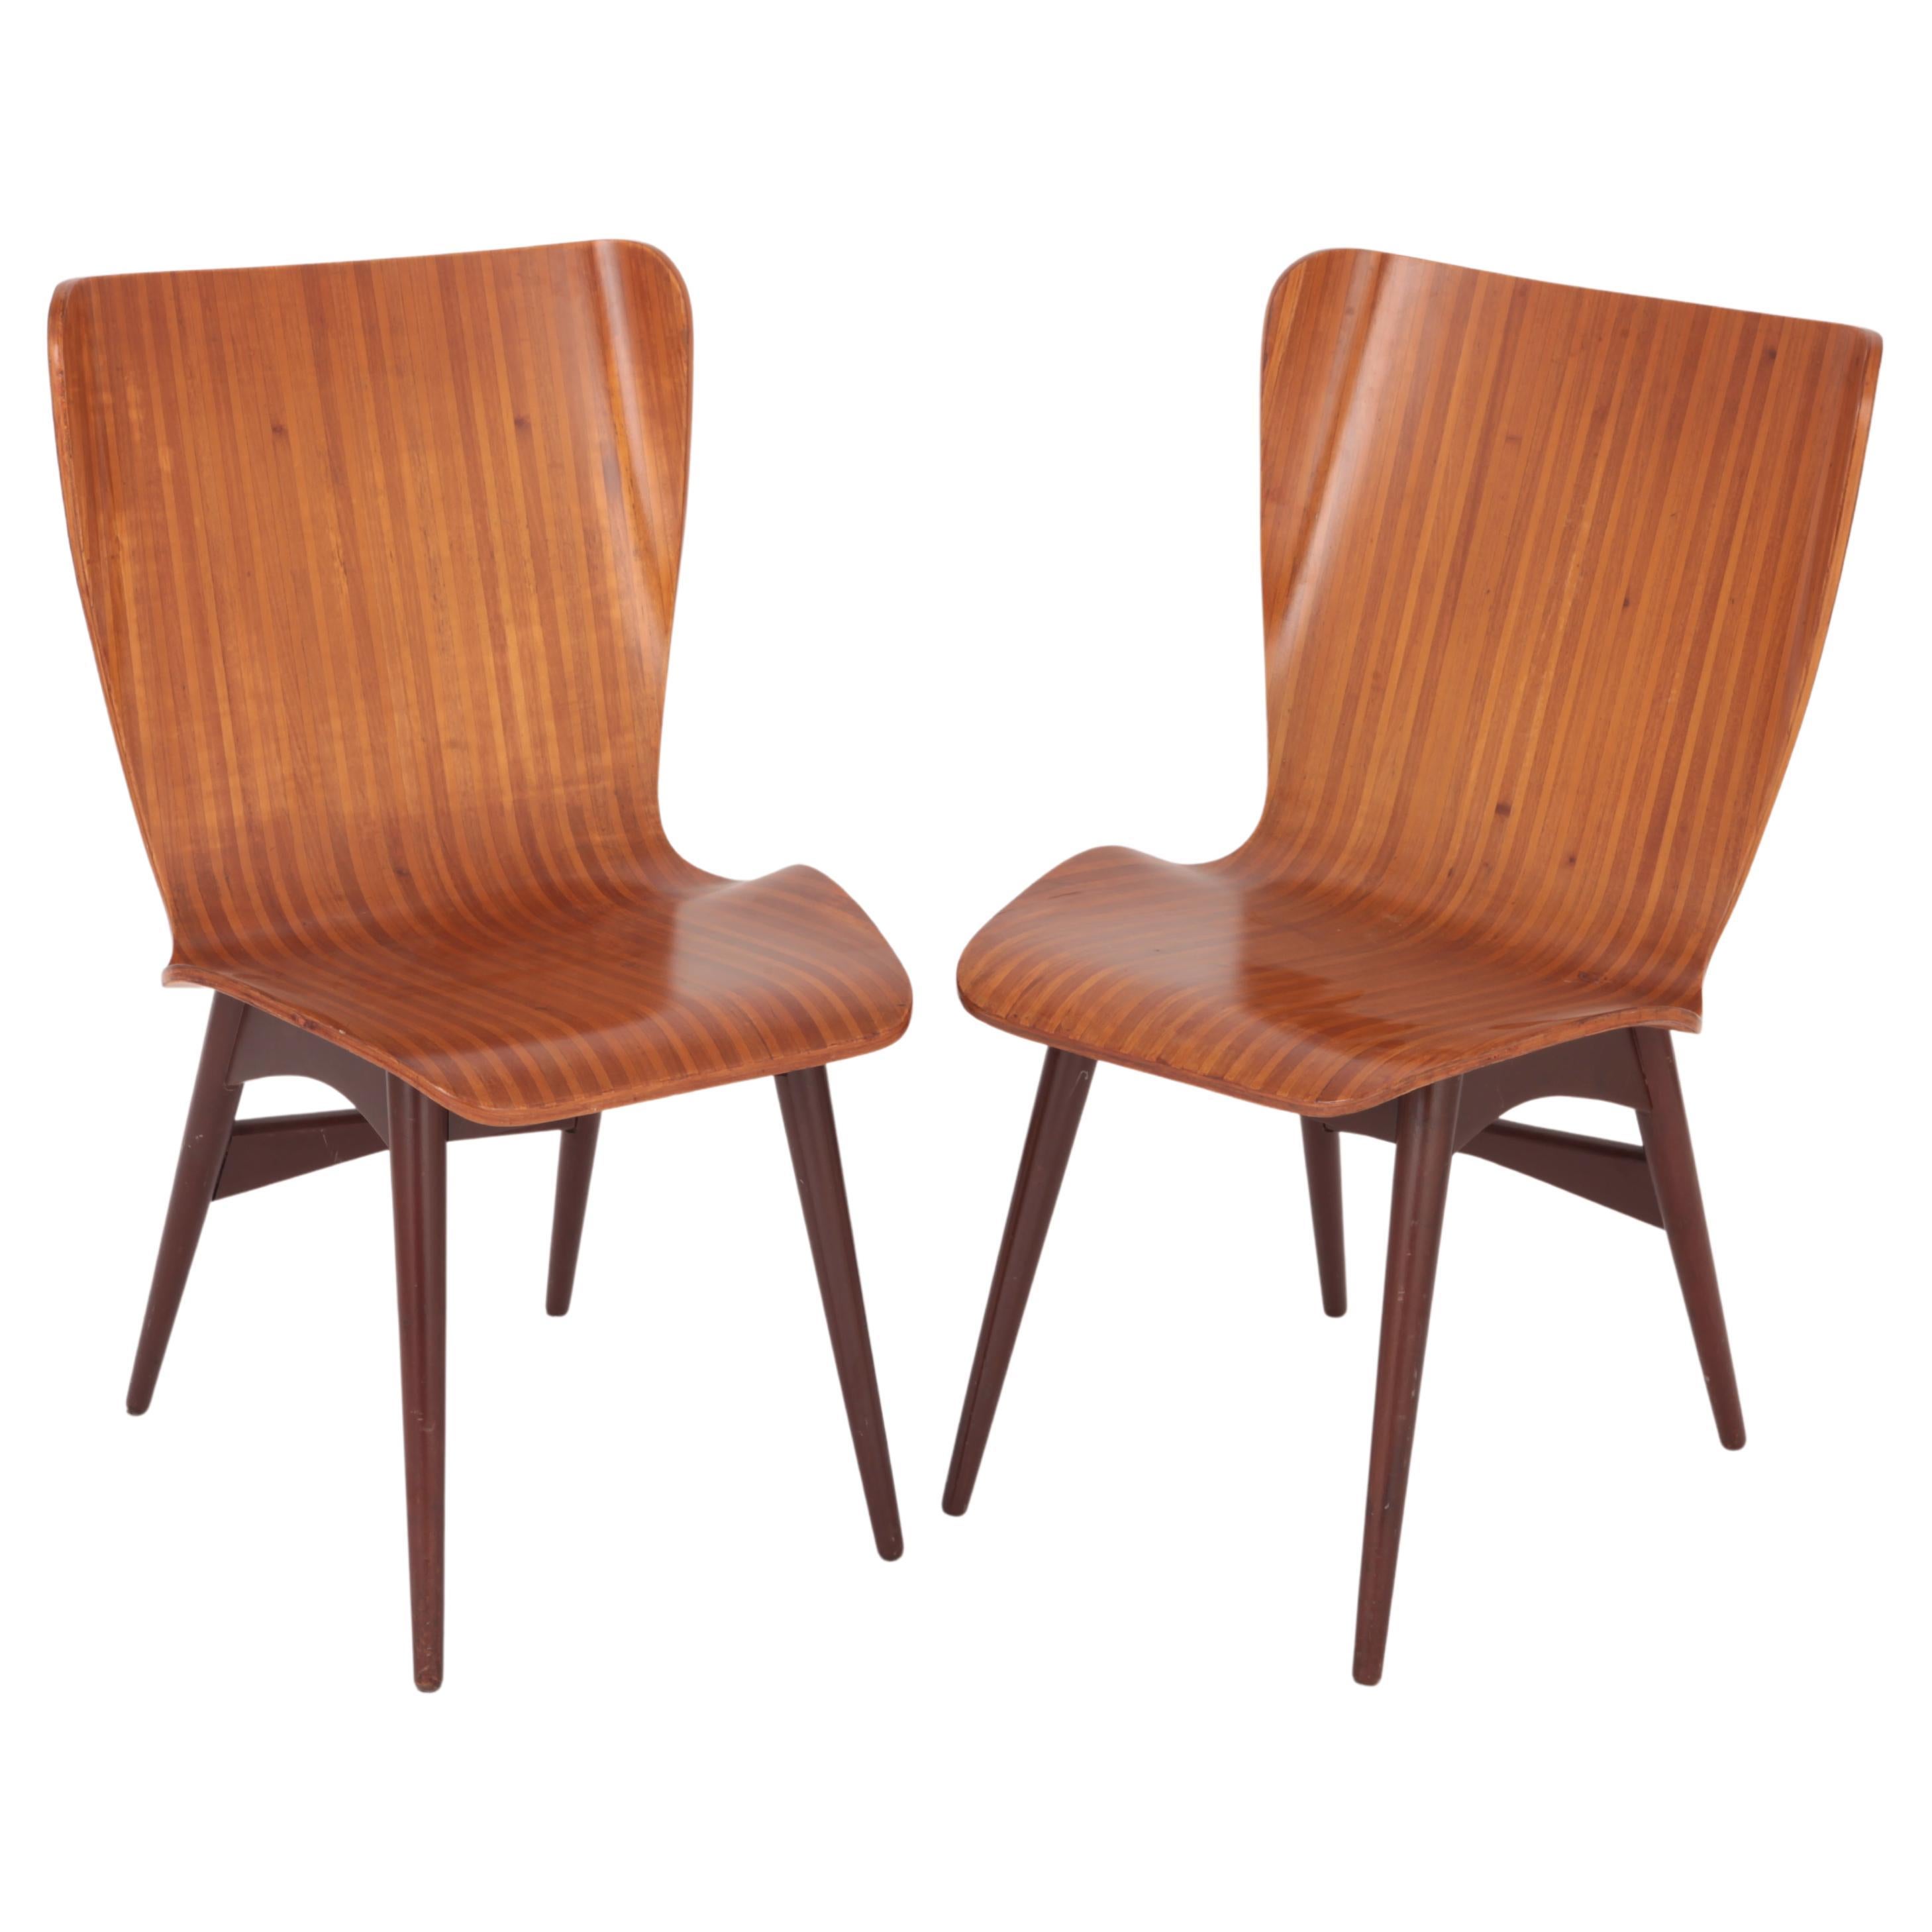 Pair of Chairs, Moveis Cimo, Brazil, 1960